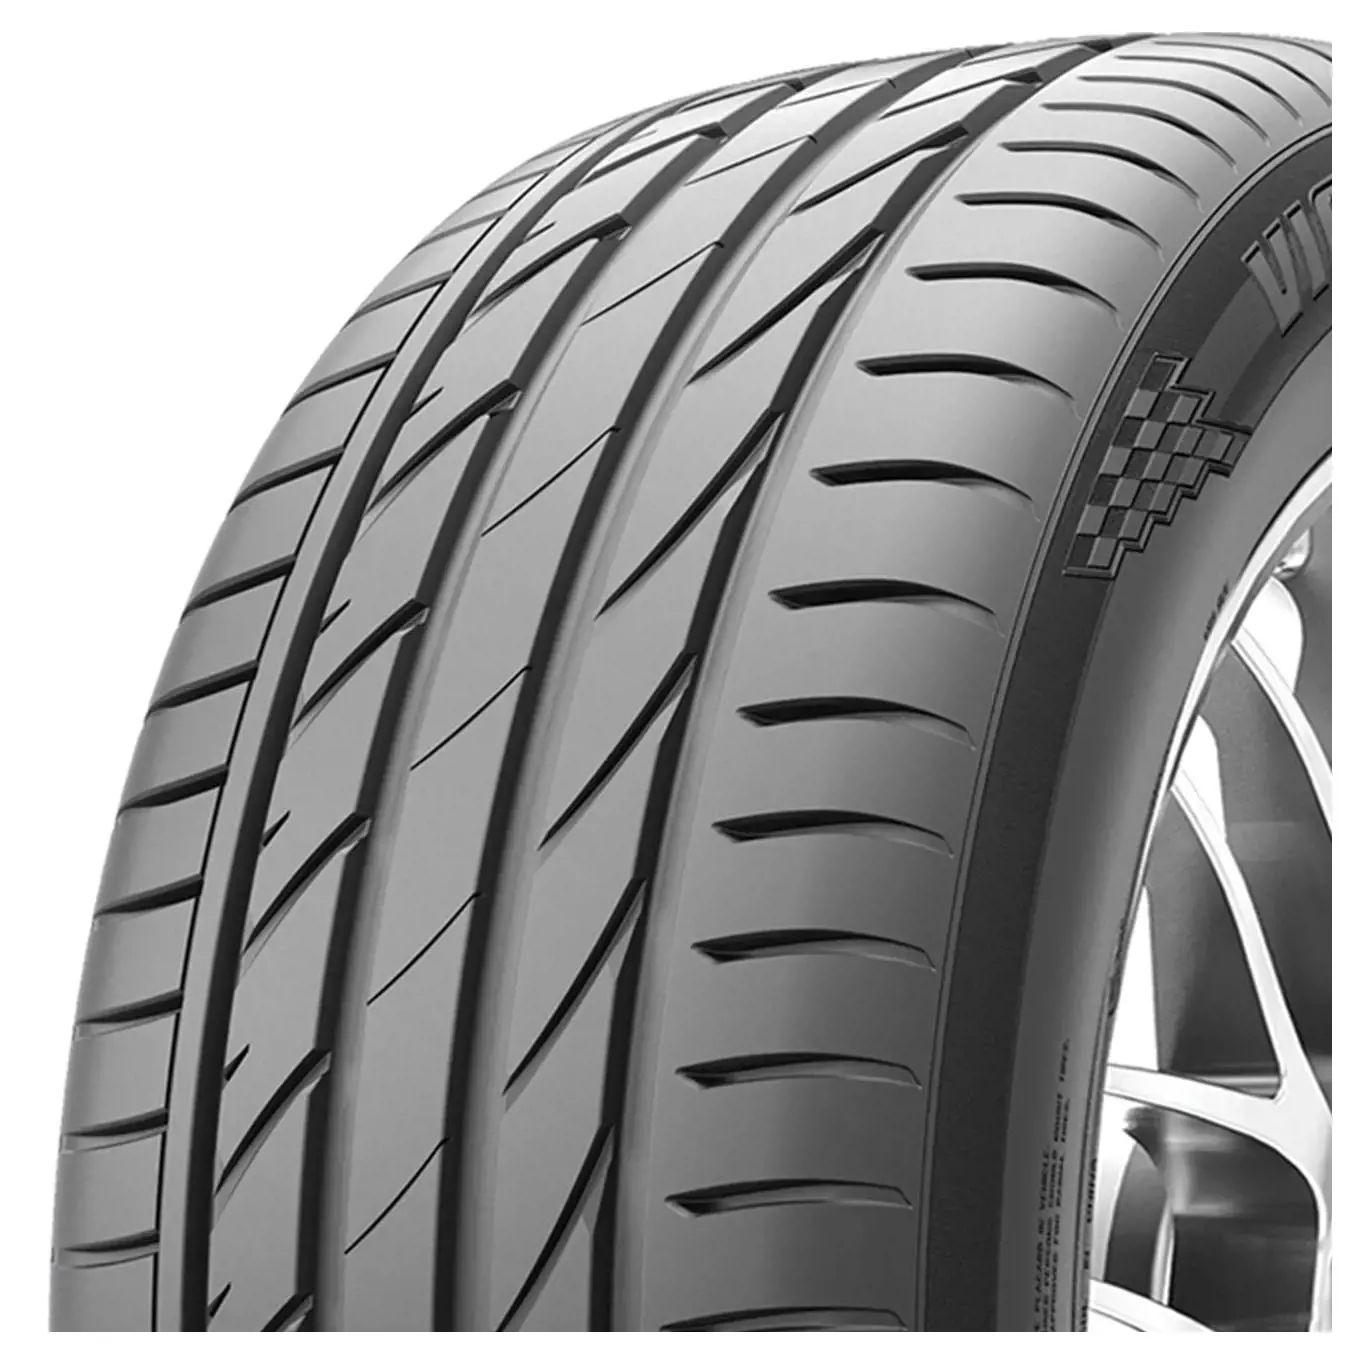 Резина maxxis victra sport. Maxxis Victra Sport 5. Maxxis Victra Sport vs5. Maxxis vs5 SUV. Maxxis vs5 SUV Victra Sport 5.